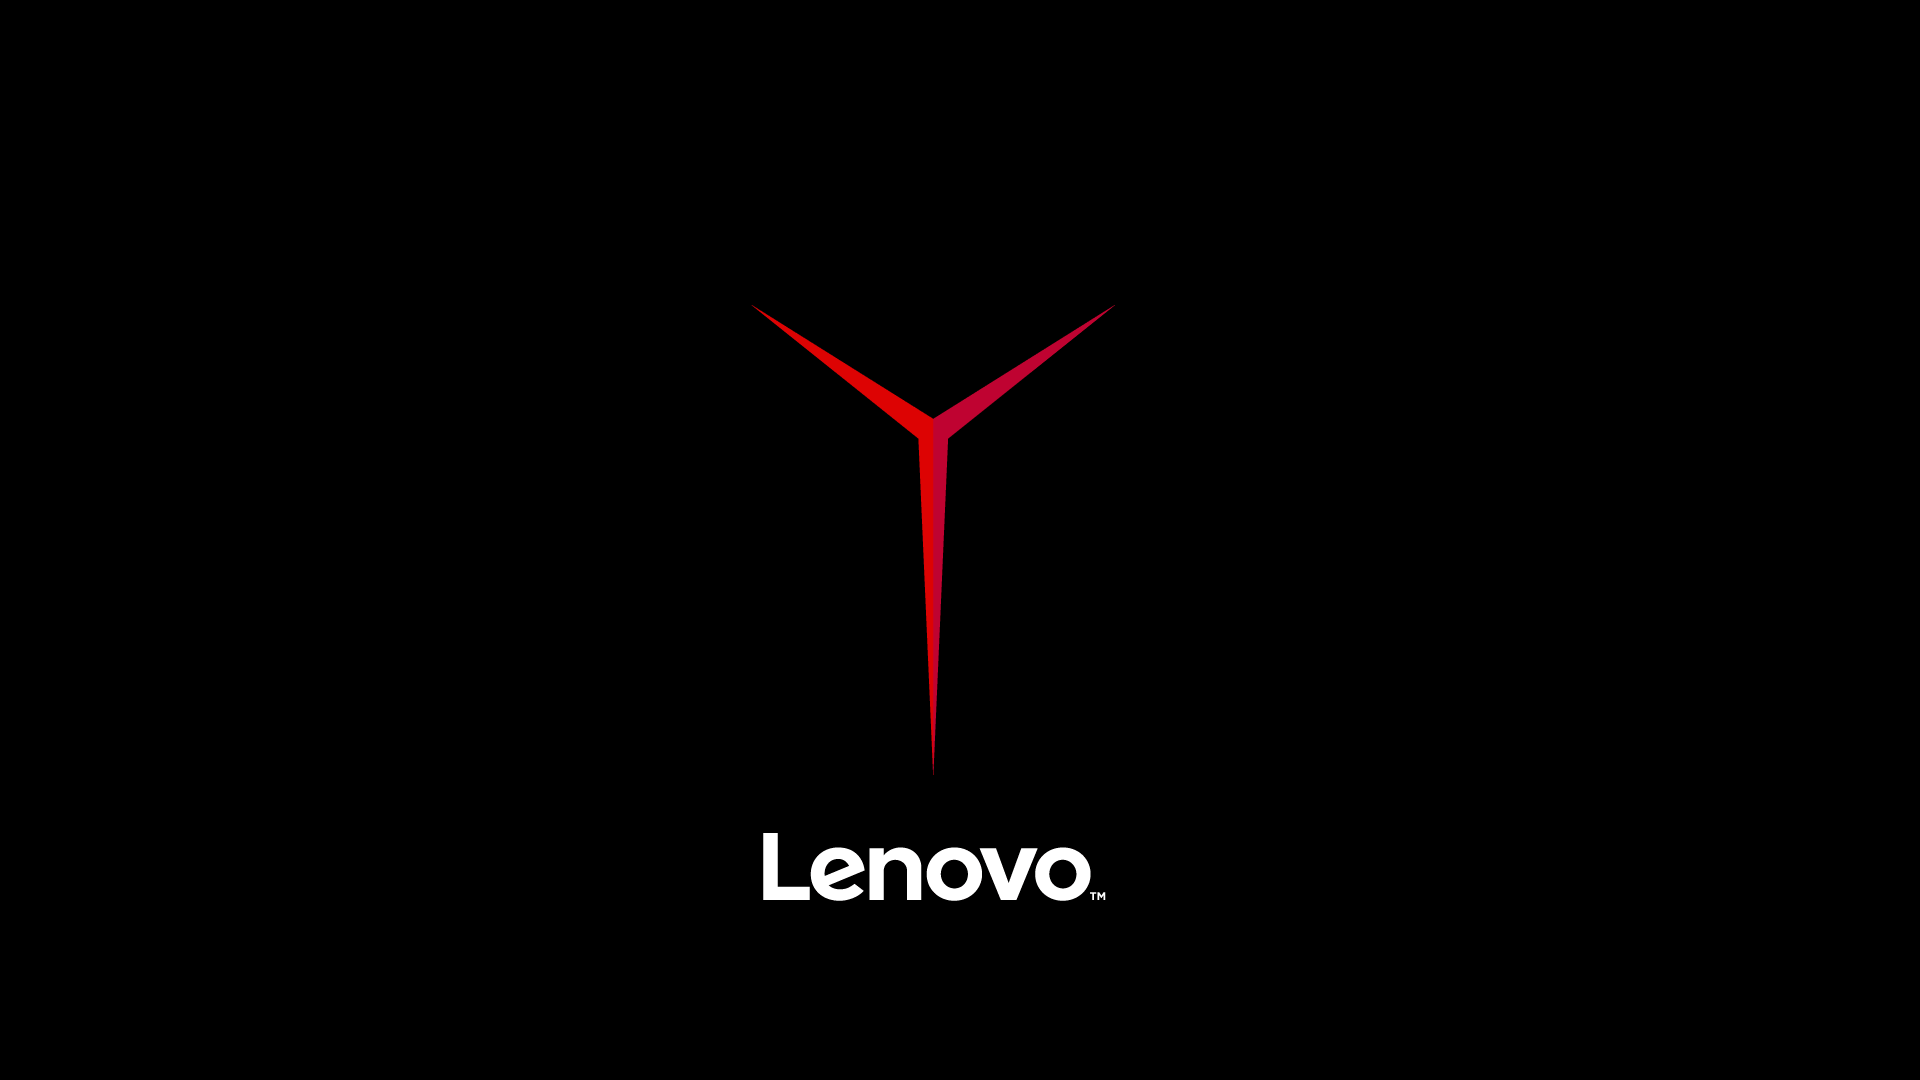 Dear Lenovo, let the Y700 have a nice boot logo like the Y900 or